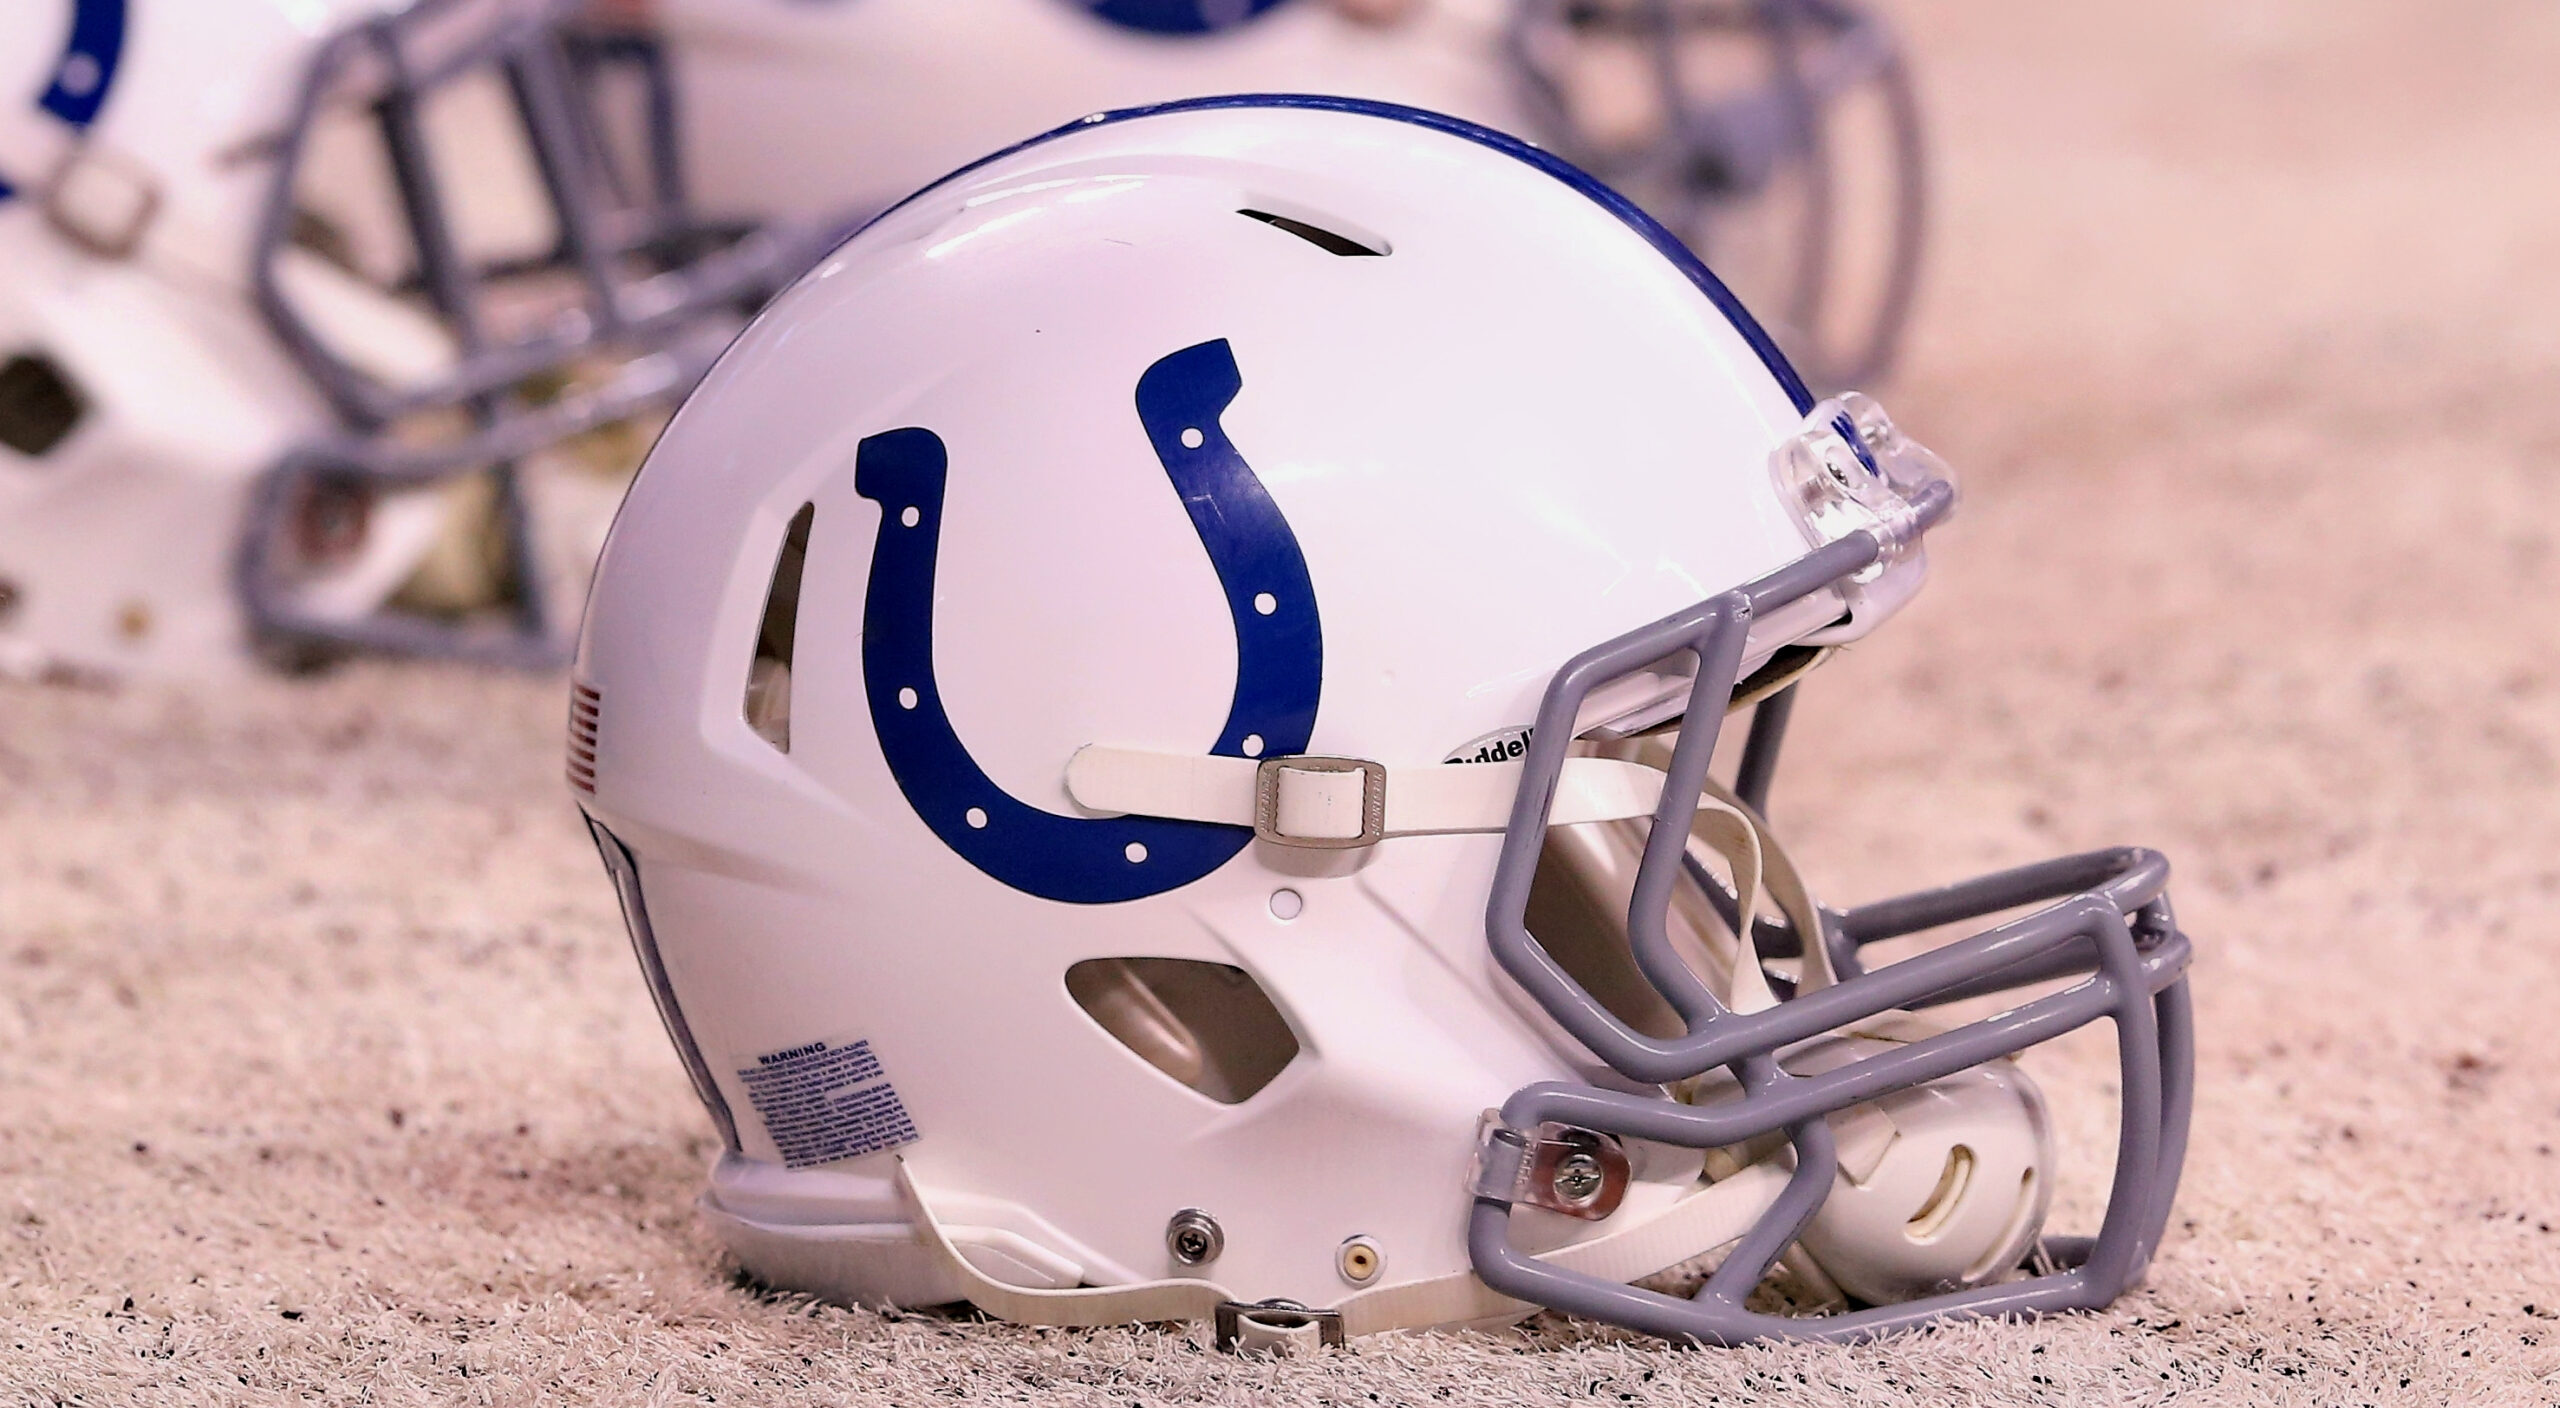 NFL Gambling Investigation: Indianapolis Colts Player Goes Off